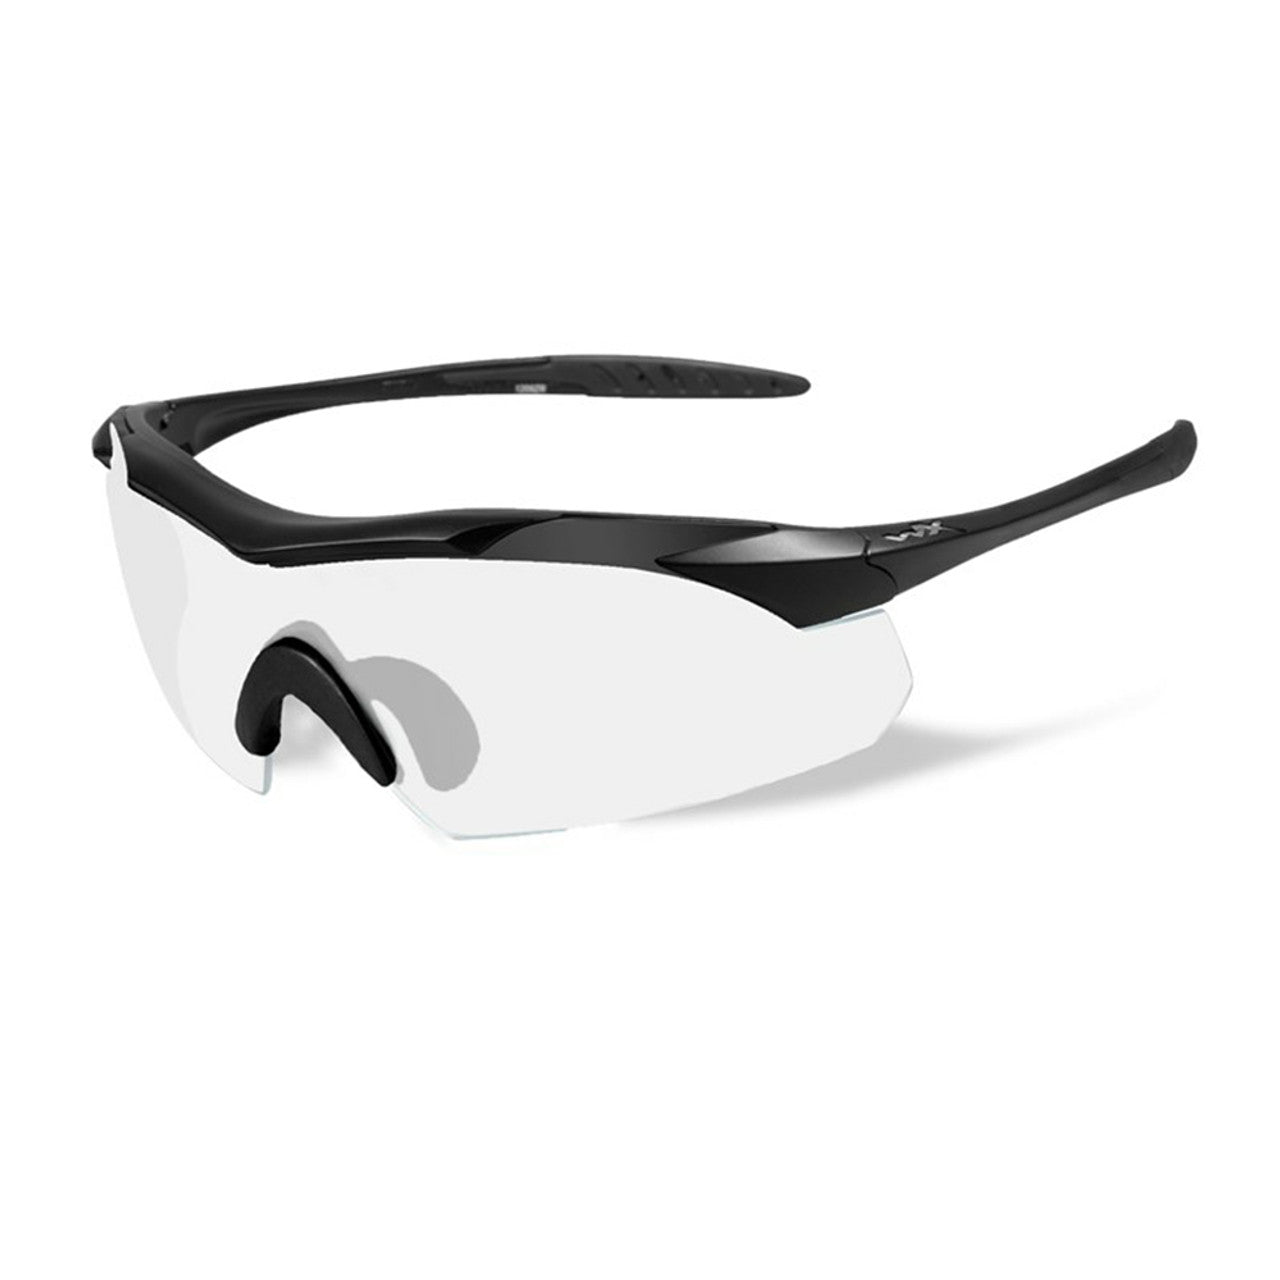 Wiley X Vapor 2.5 Three Lens System - Grey, Polarised Grey and Clear Lens with 2 Frames Eyewear Wiley X Tactical Gear Supplier Tactical Distributors Australia